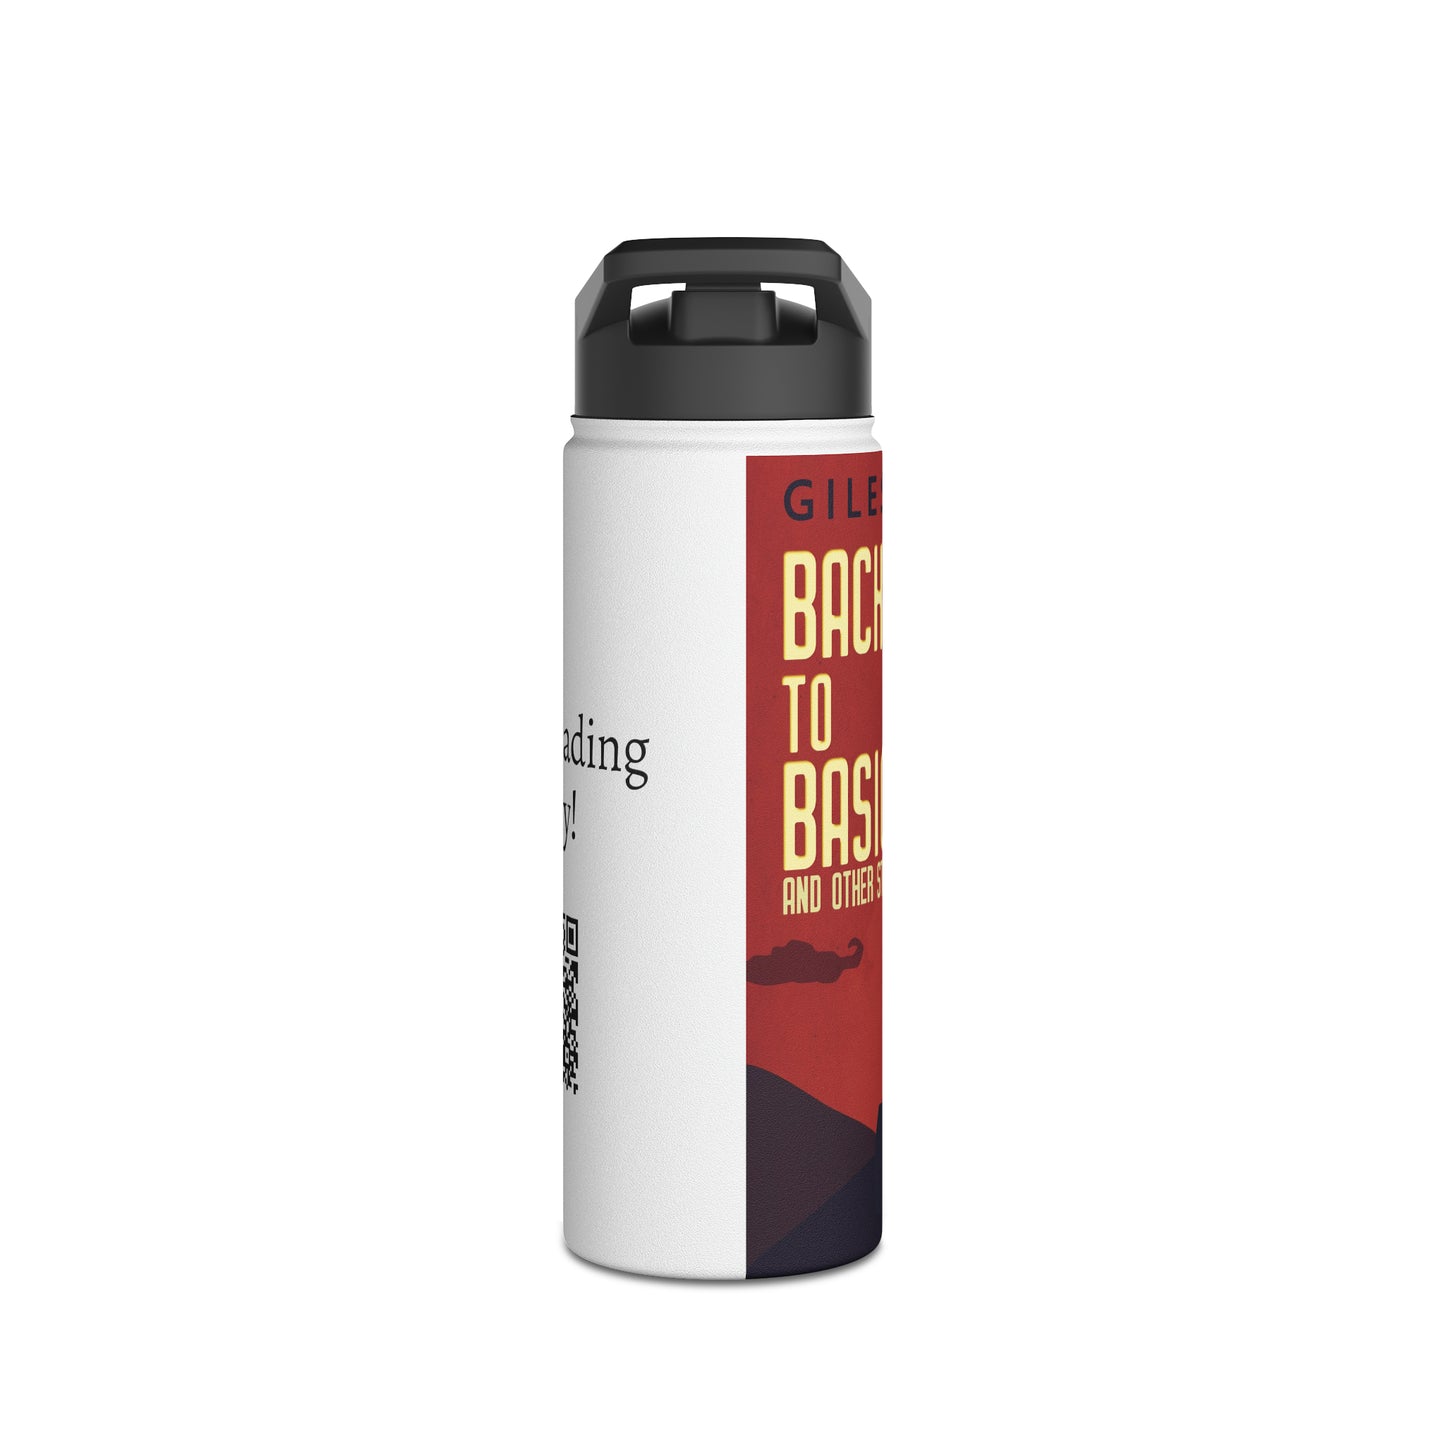 Back To Basics And Other Stories - Stainless Steel Water Bottle